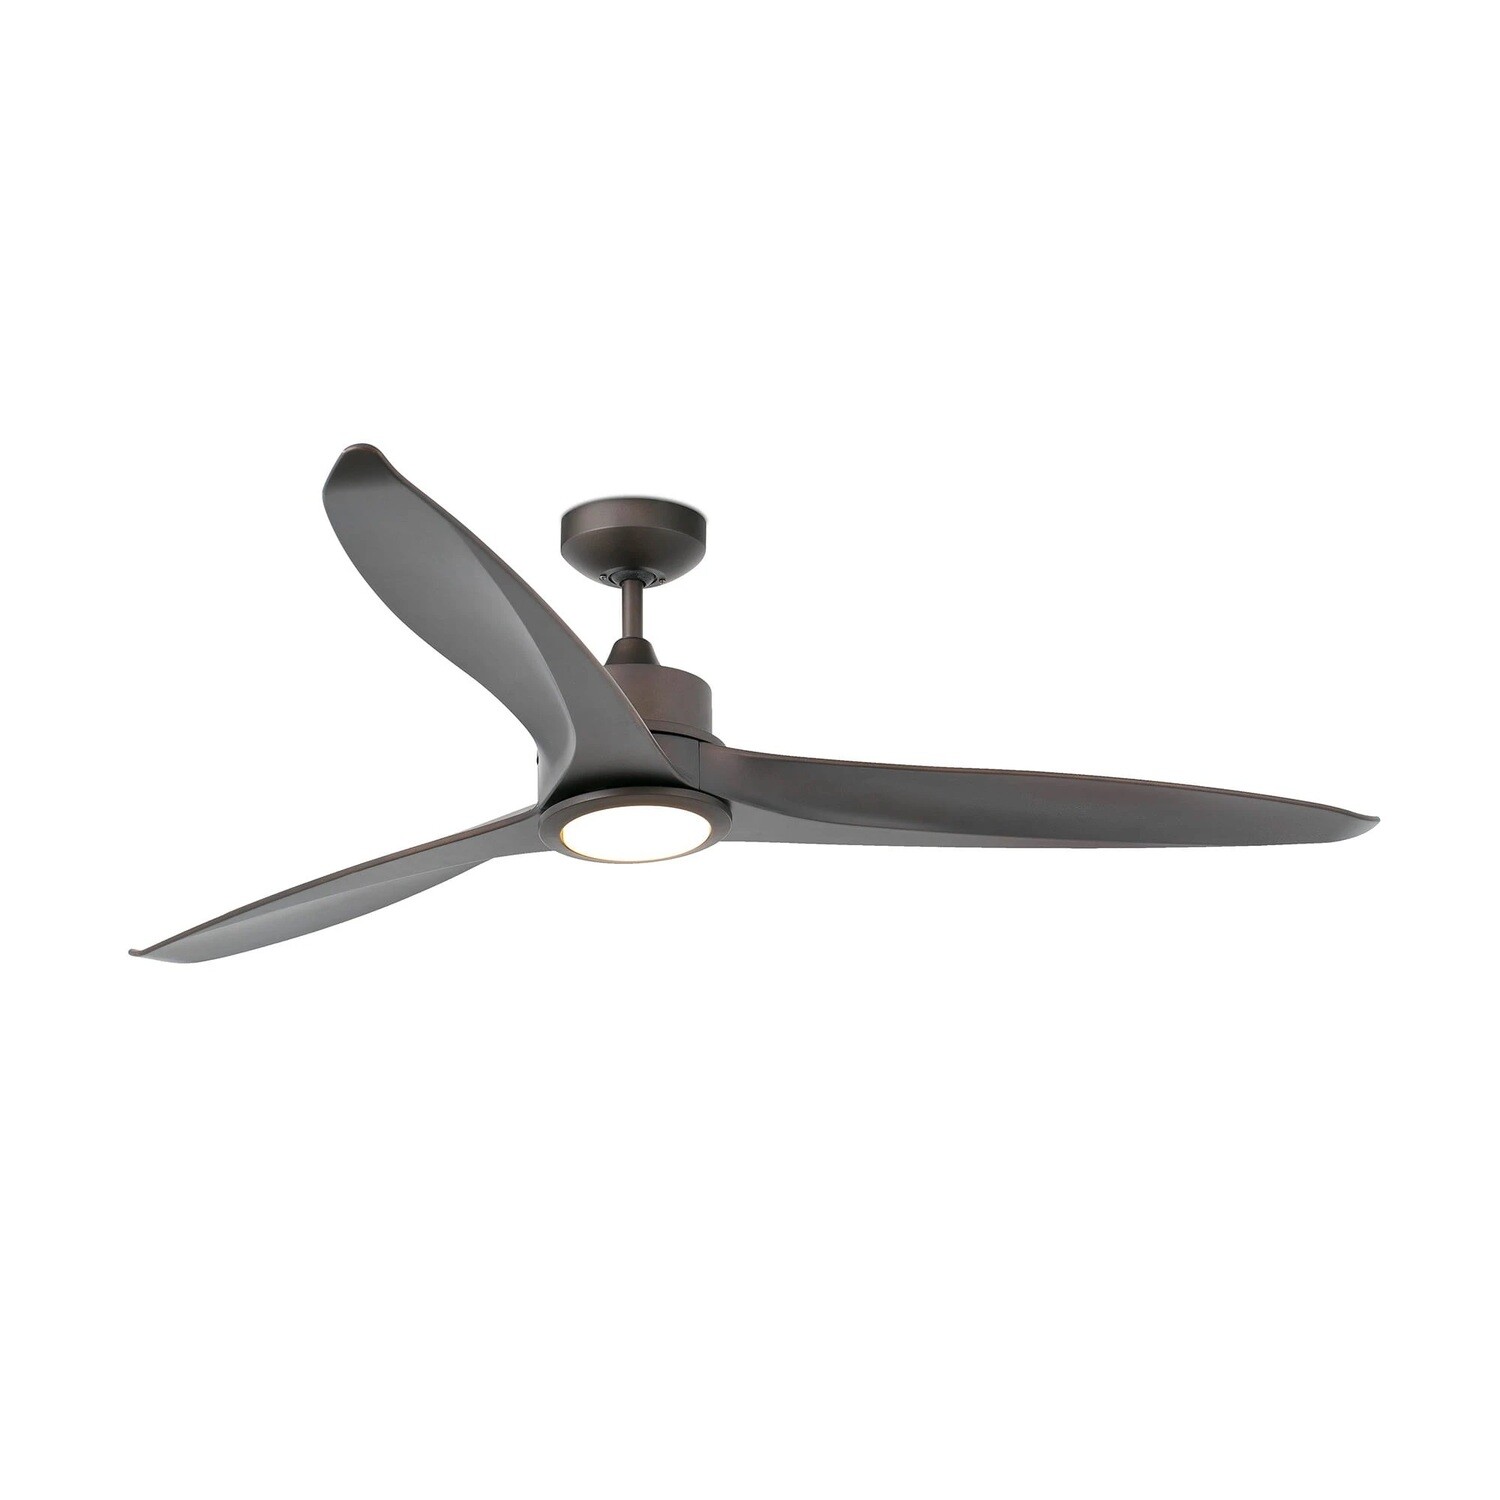 TONIC Dark Brown ceiling fan Ø152cm light integrated and remote control included